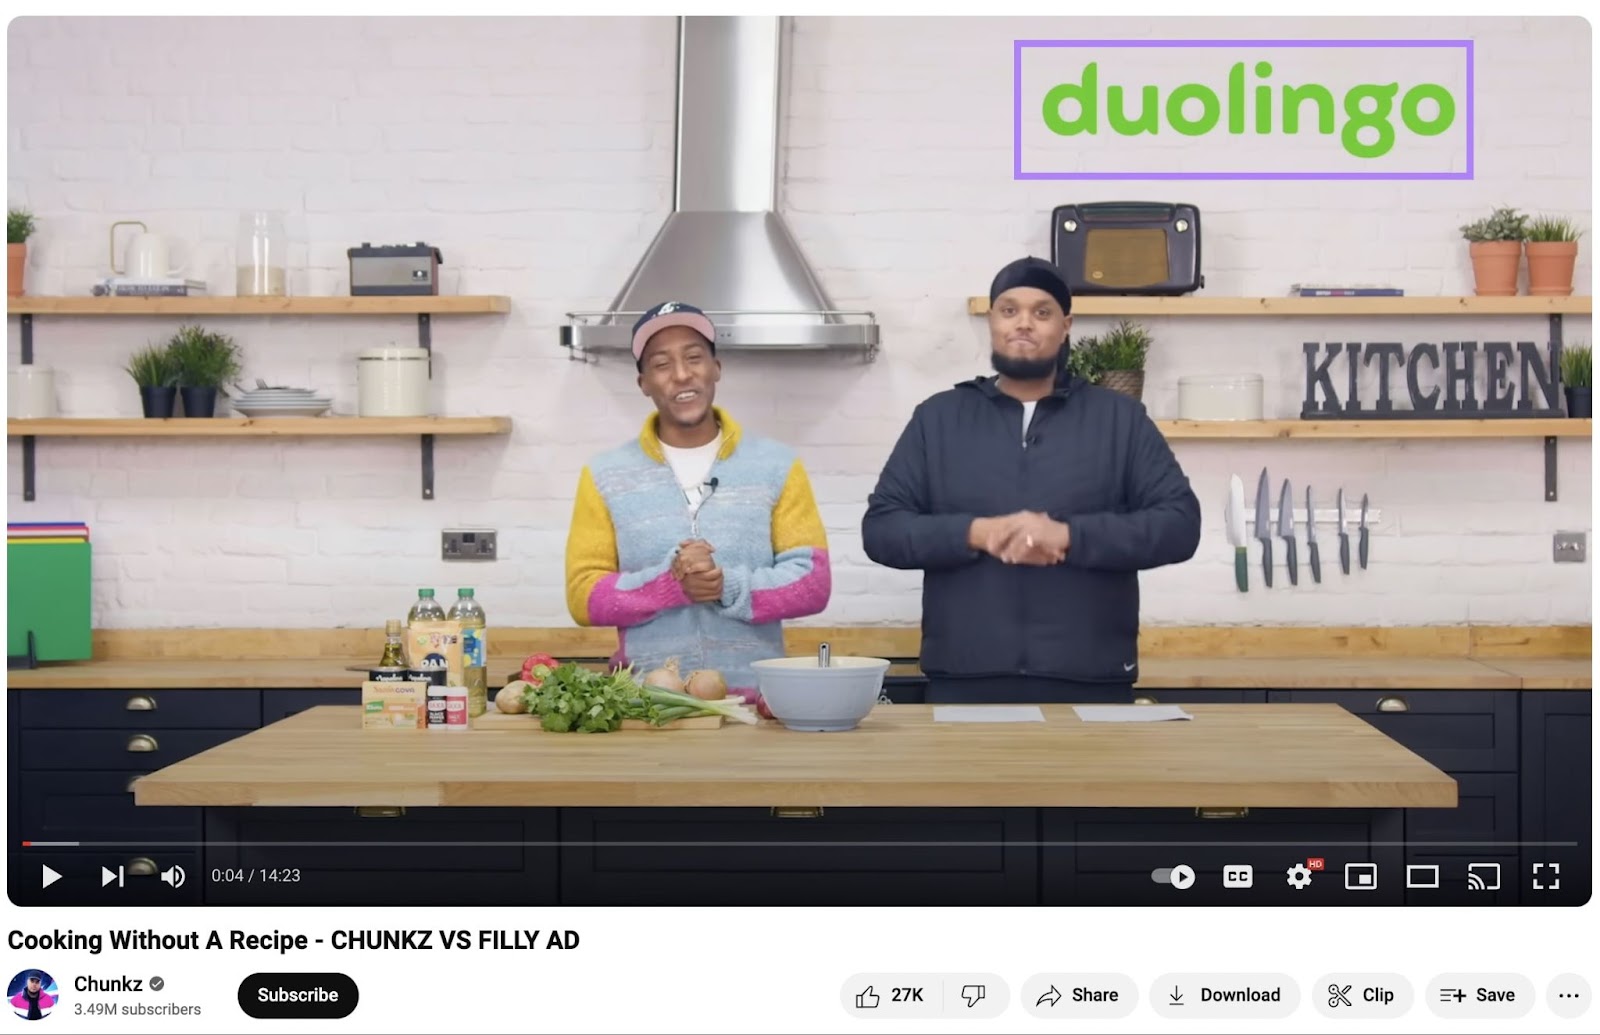 Cooking Youtube video with two men in a kitchen ready to cook a recipe. Duolingo logo in top right corner